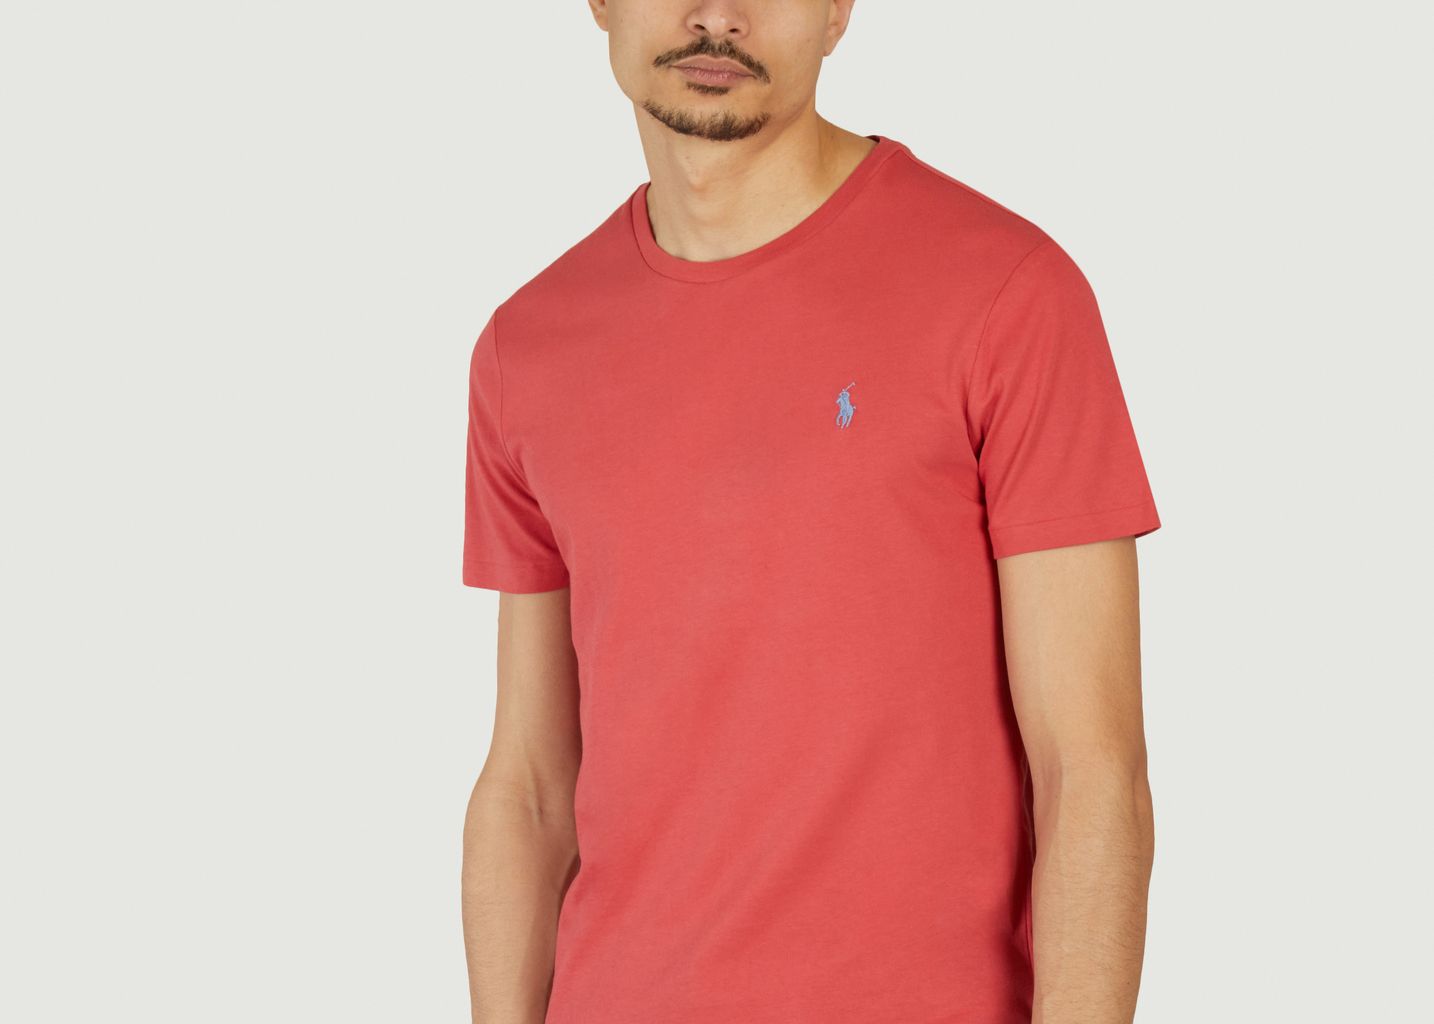 Fitted, round-neck jersey T-shirt, - Polo Ralph Lauren